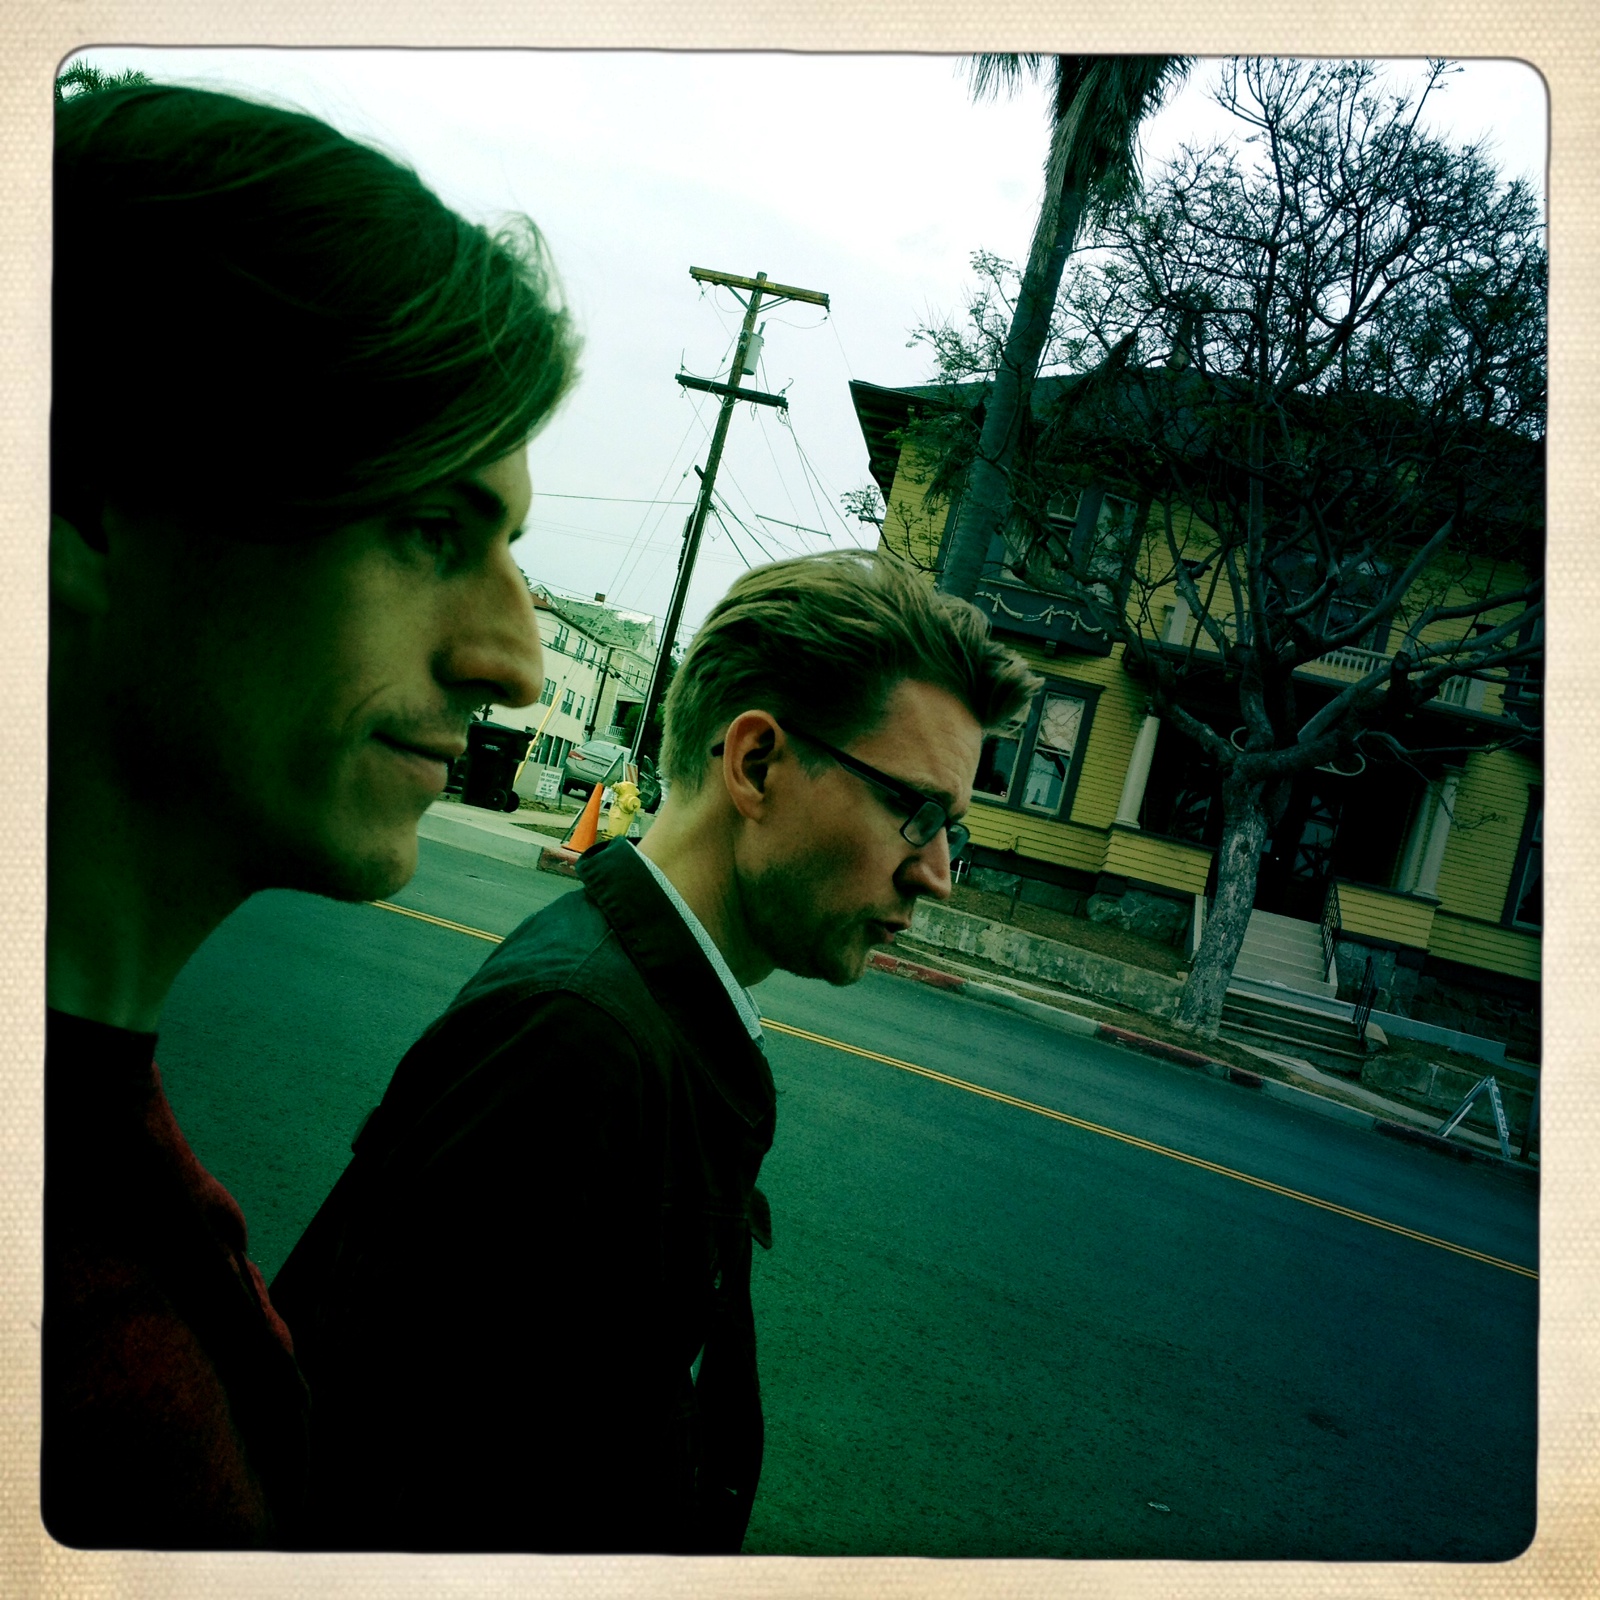 Chris Miskiewicz (left) and Palle Schmidt (right), San Diego 2013.